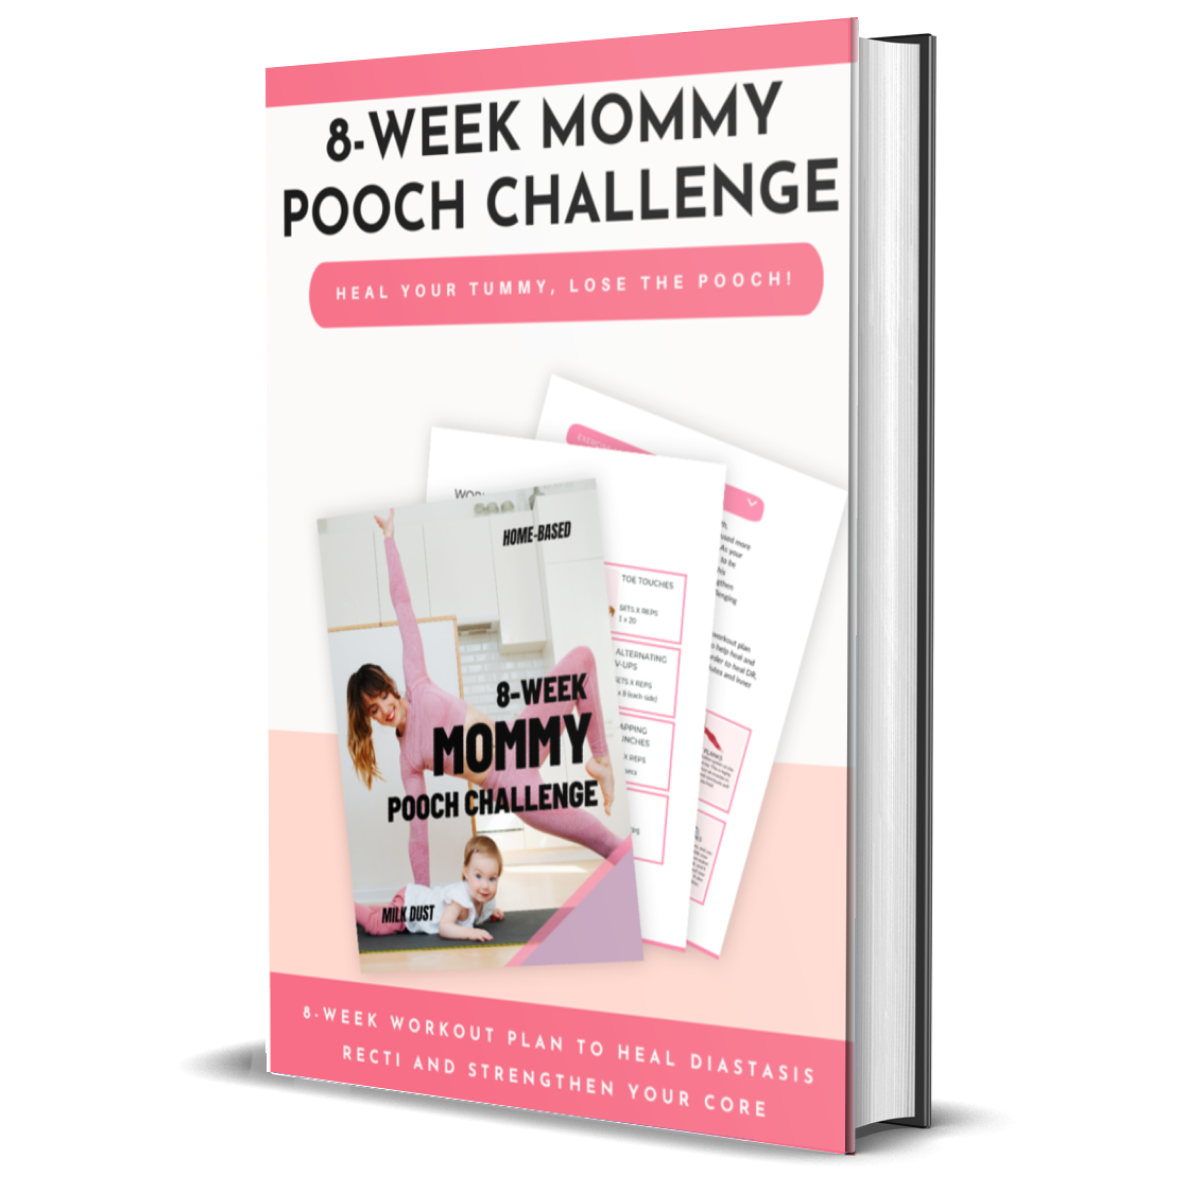 How To Get Rid of Your Mom Pooch: The Ultimate Guide - Spices